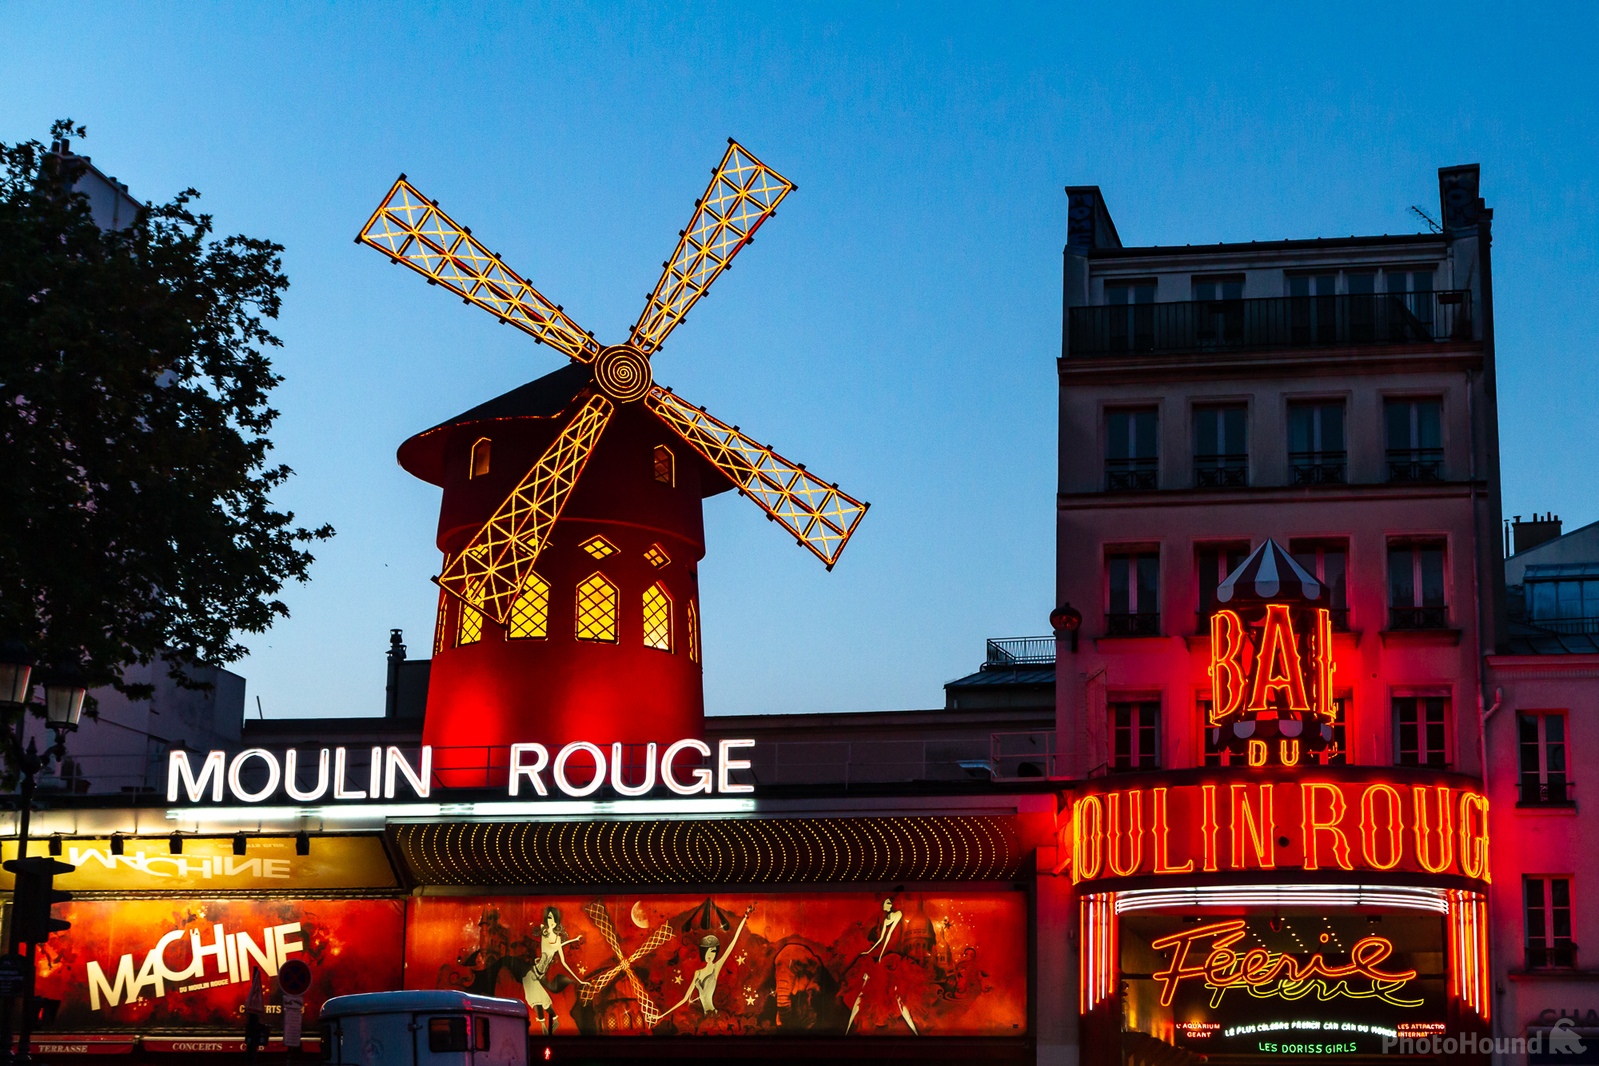 Image of Moulin Rouge by Carol Henson